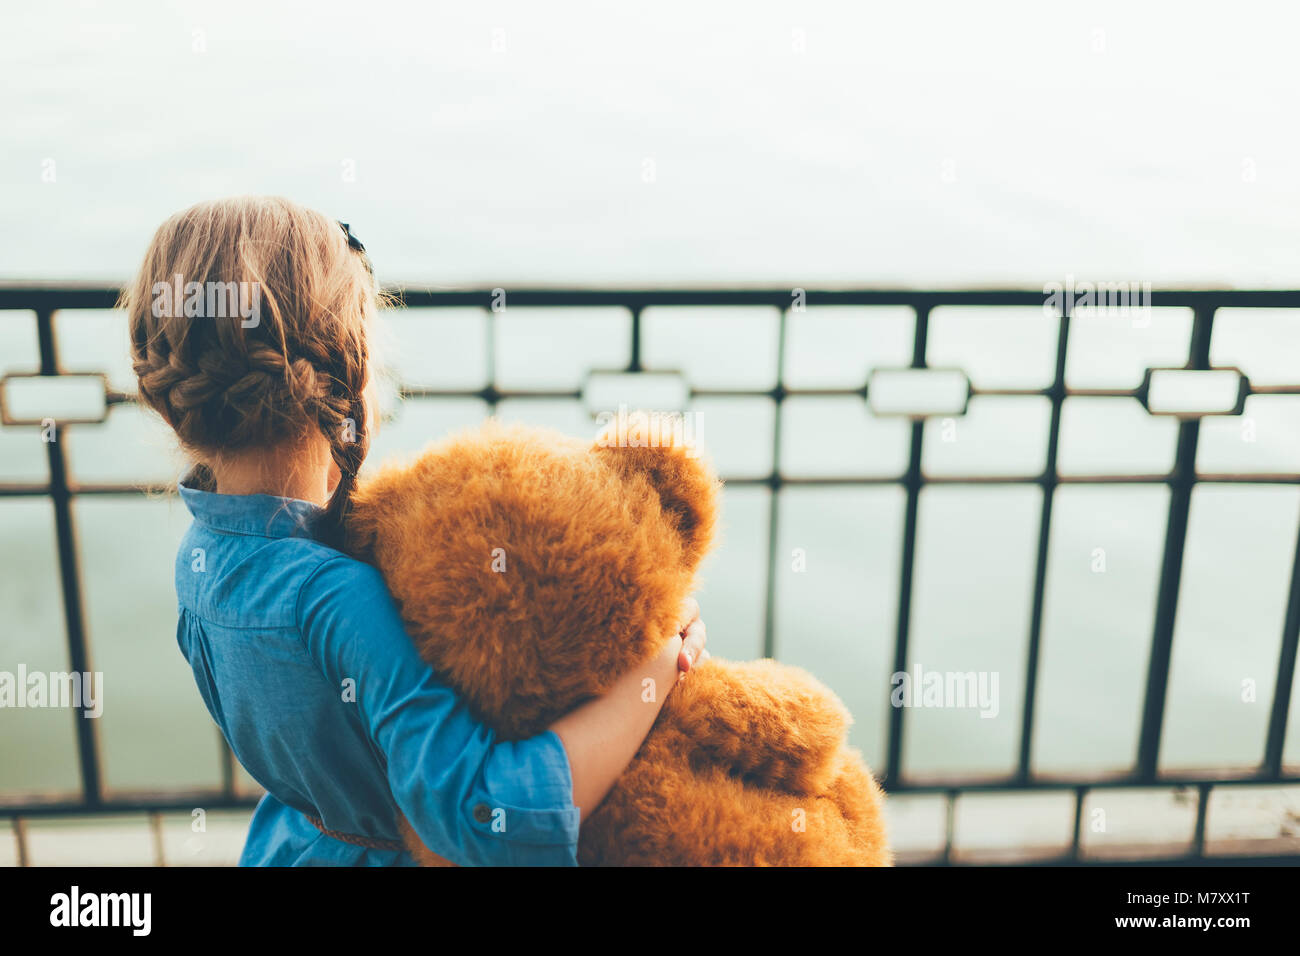 Back view of girl embracing a cute teddy bear looking to lake wearing denim dress. Kids friendship concept. Friendly kid. Copy space available. Stock Photo